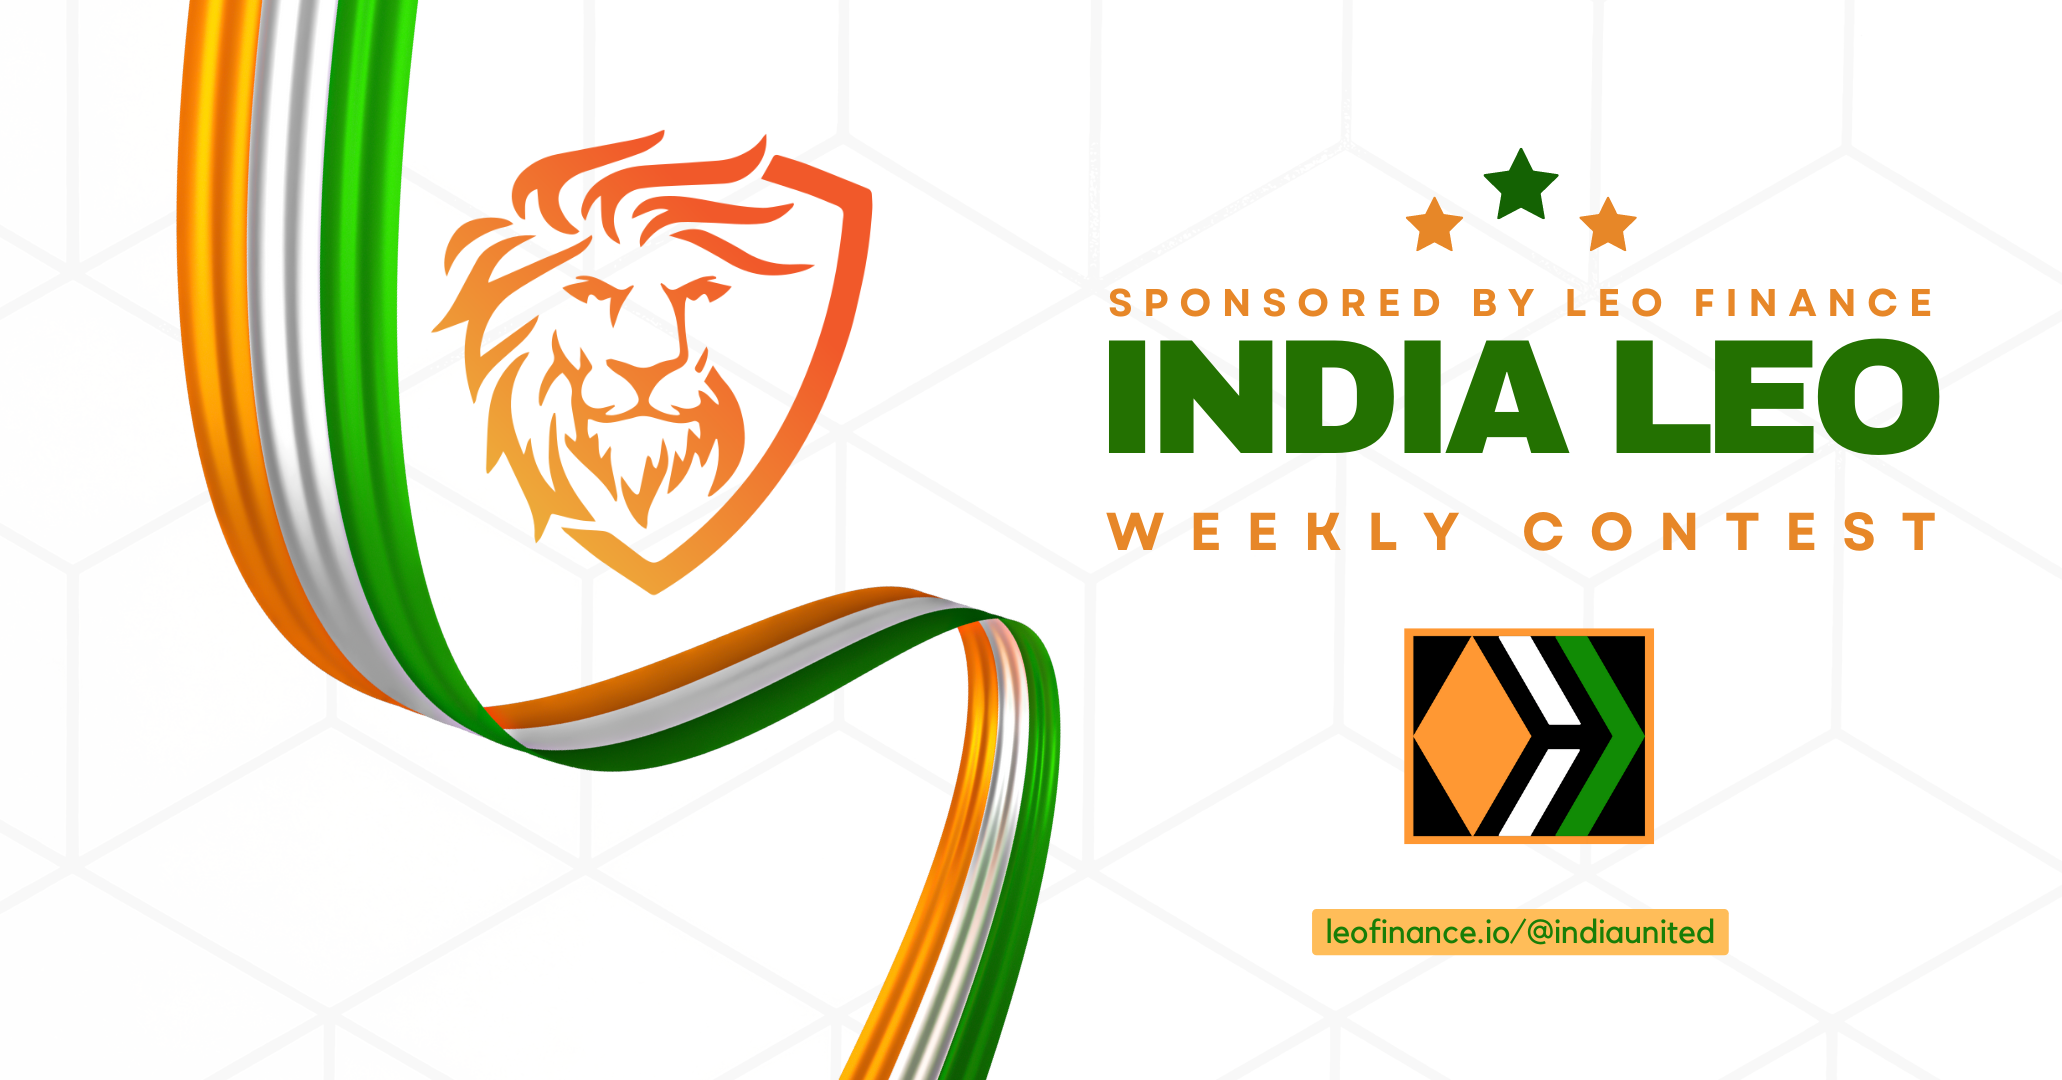 @indiaunited/india-leo-weekly-contest-announcing-winners-and-this-week-s-topic-6rp95m